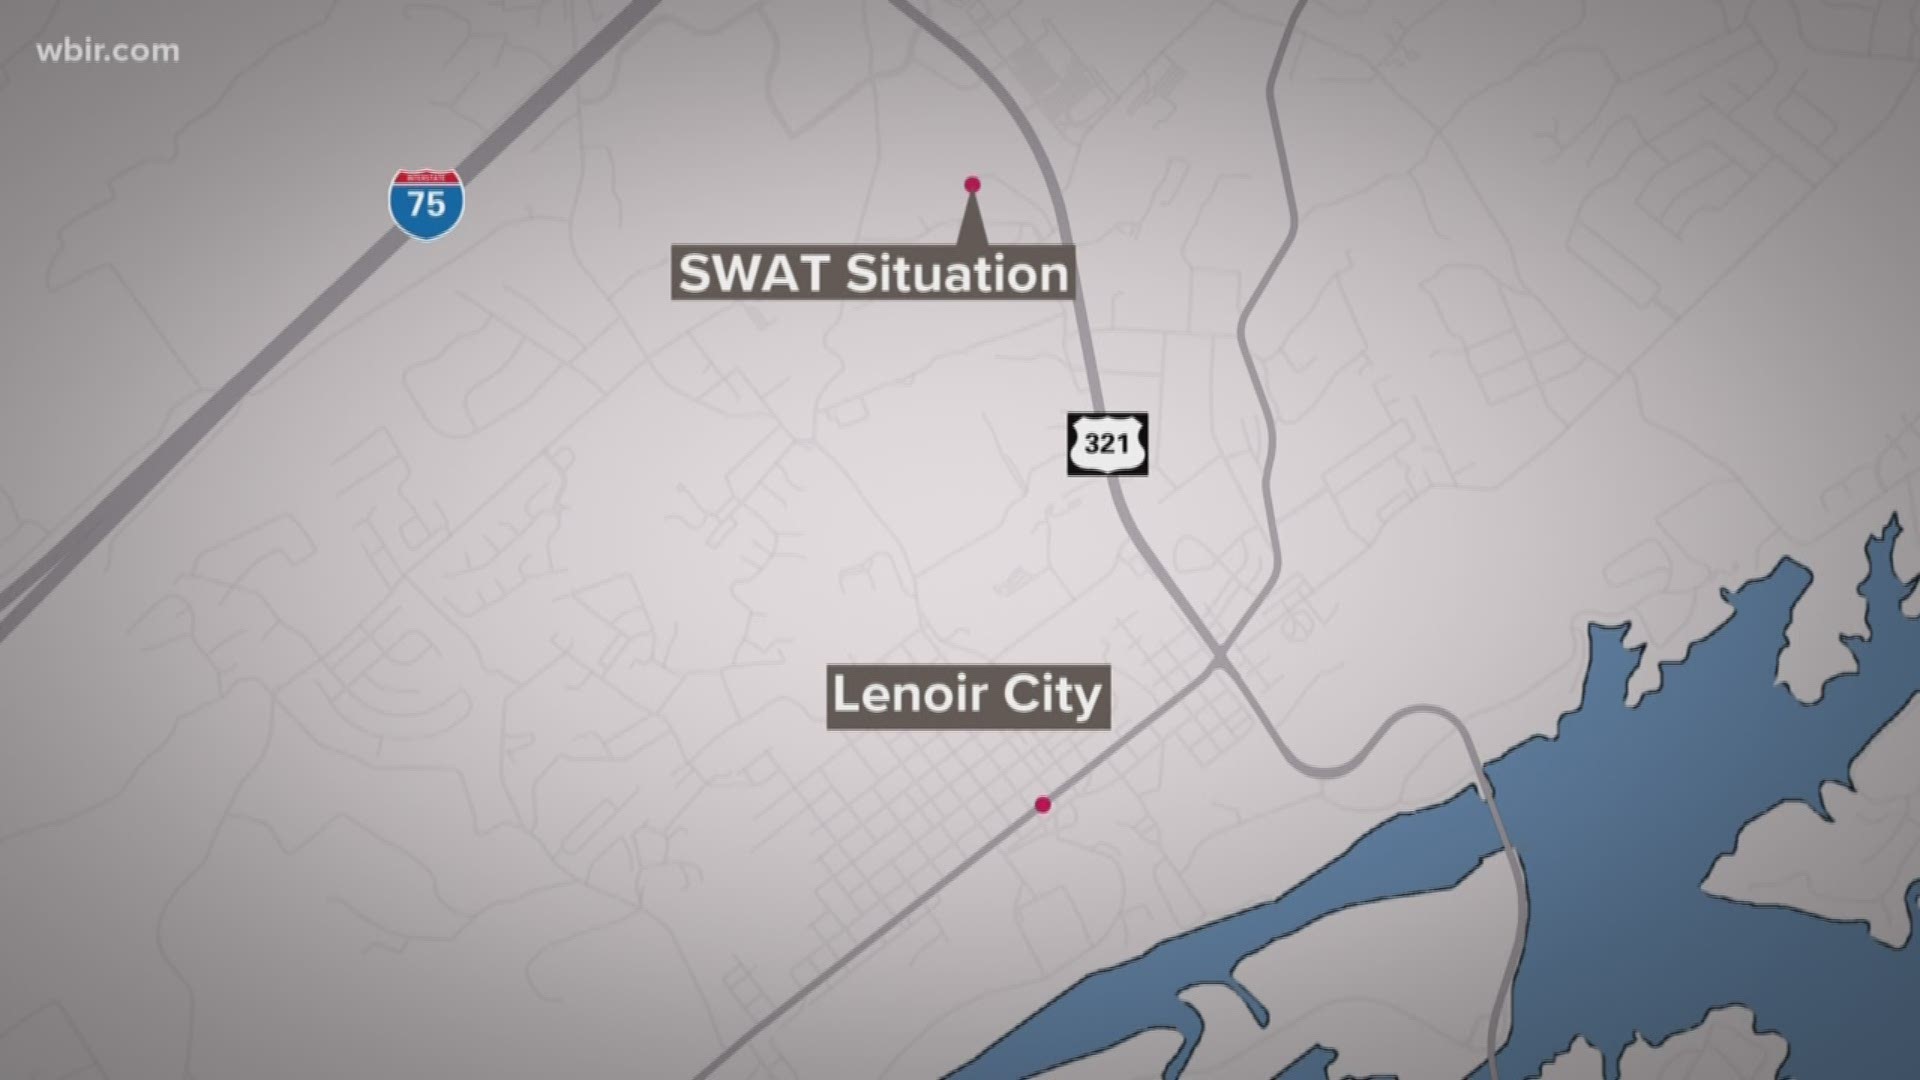 The Loudon County Sheriff's Office said it called in the BCSO SWAT team to assist after a man led them on a pursuit and locked himself inside an apartment at Town Creek Village Apartments Saturday morning.